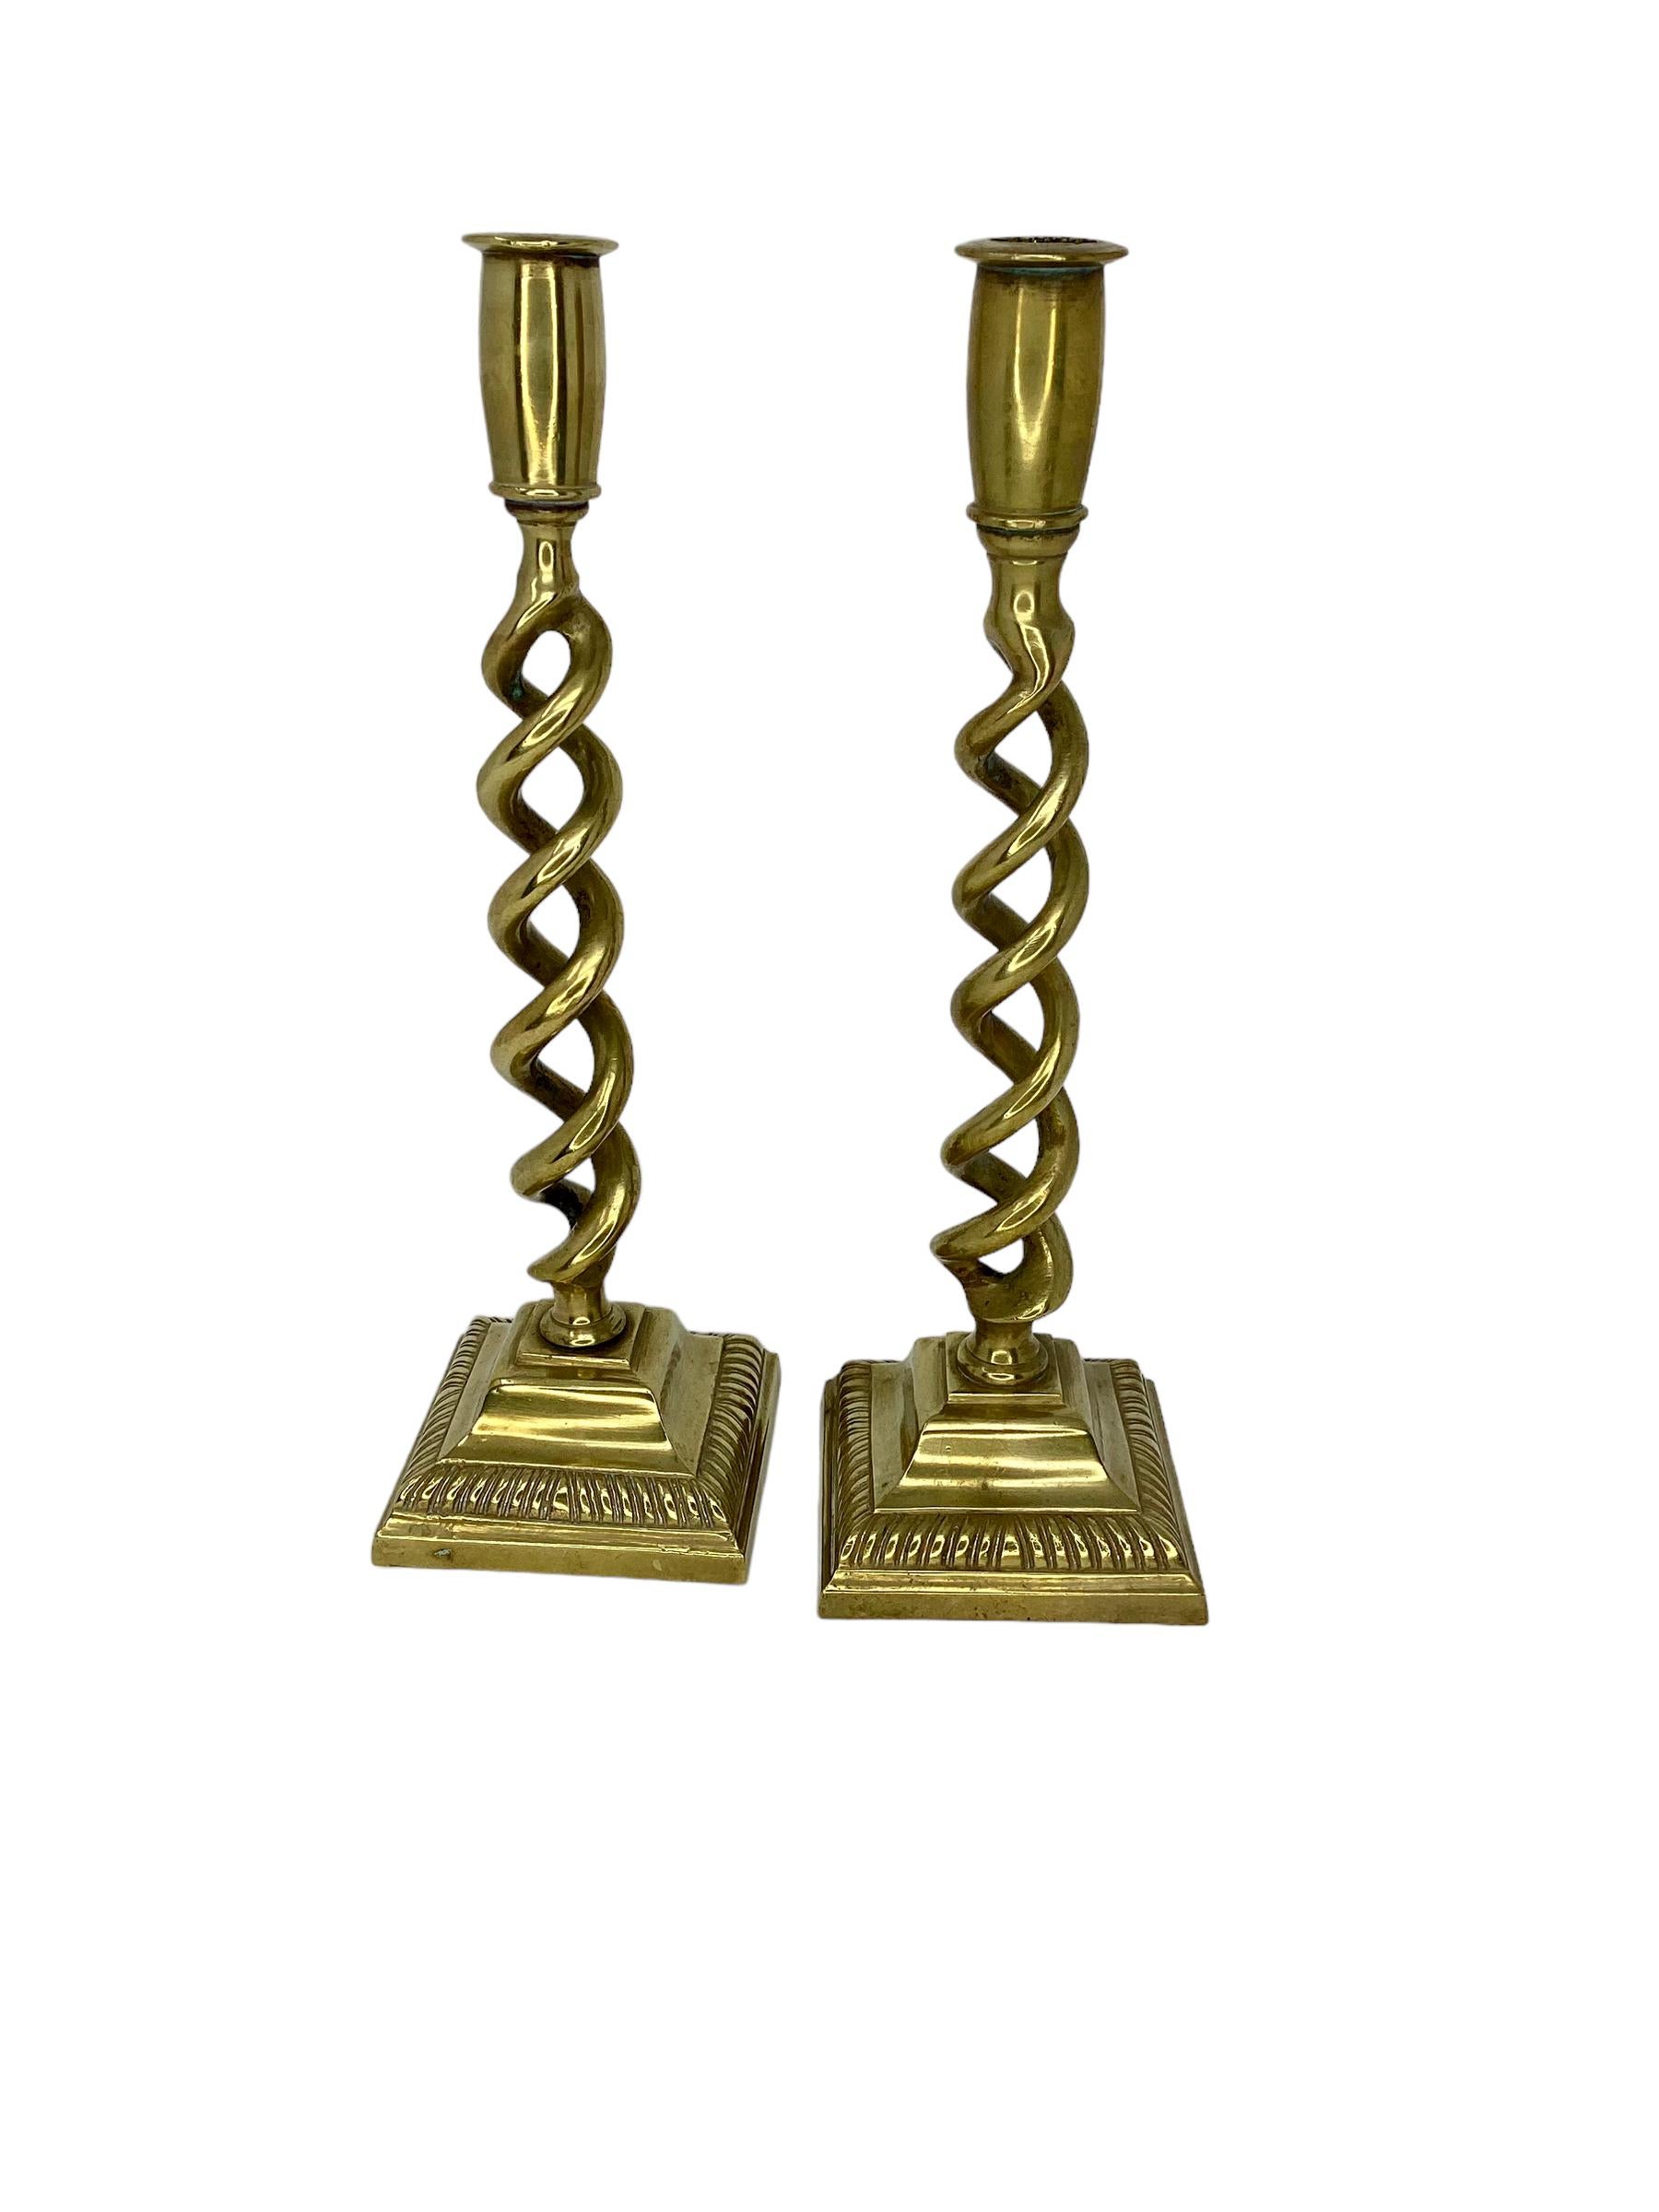 Pair of Antique English Barley Candlesticks? Spiral twist sits a cast stepped base.